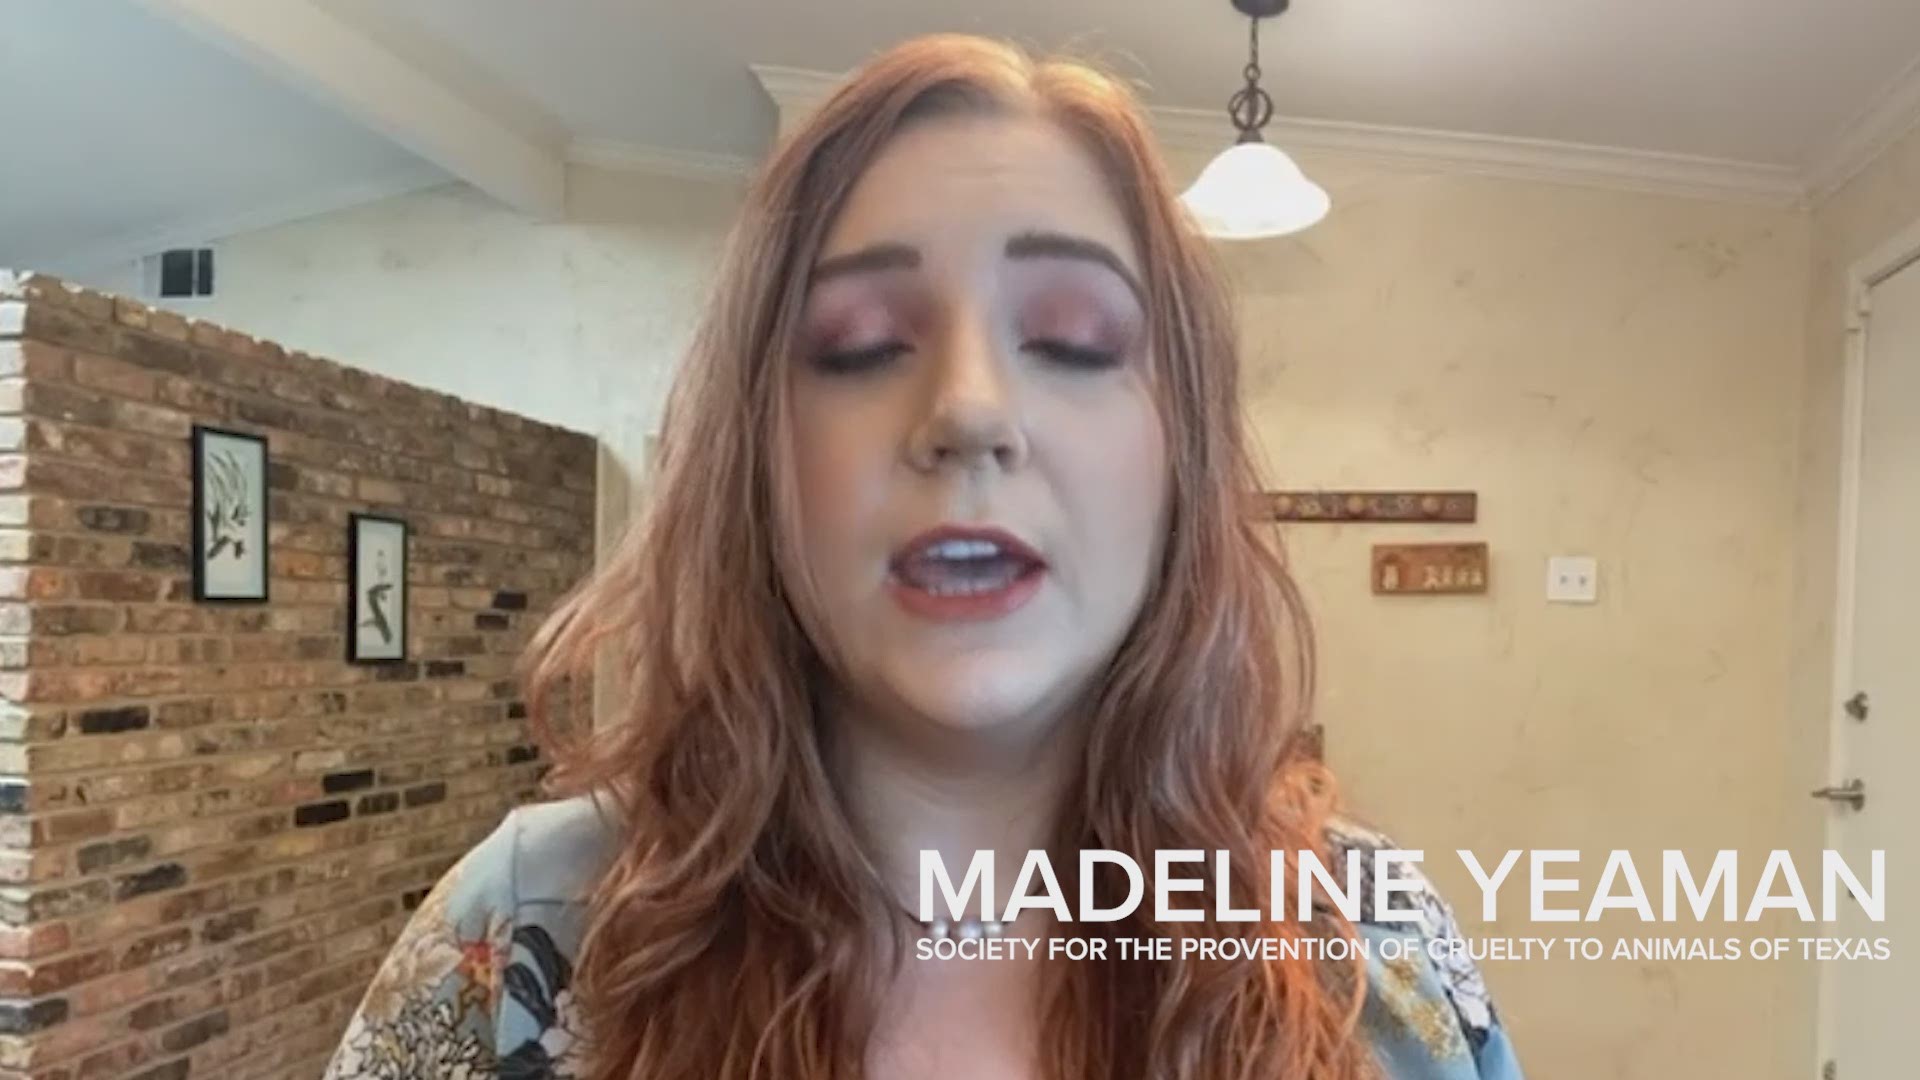 Madeline Yeaman works for the Society for the Prevention of Cruelty to Animals of Texas. She explains why fostering can give animals more focused care.